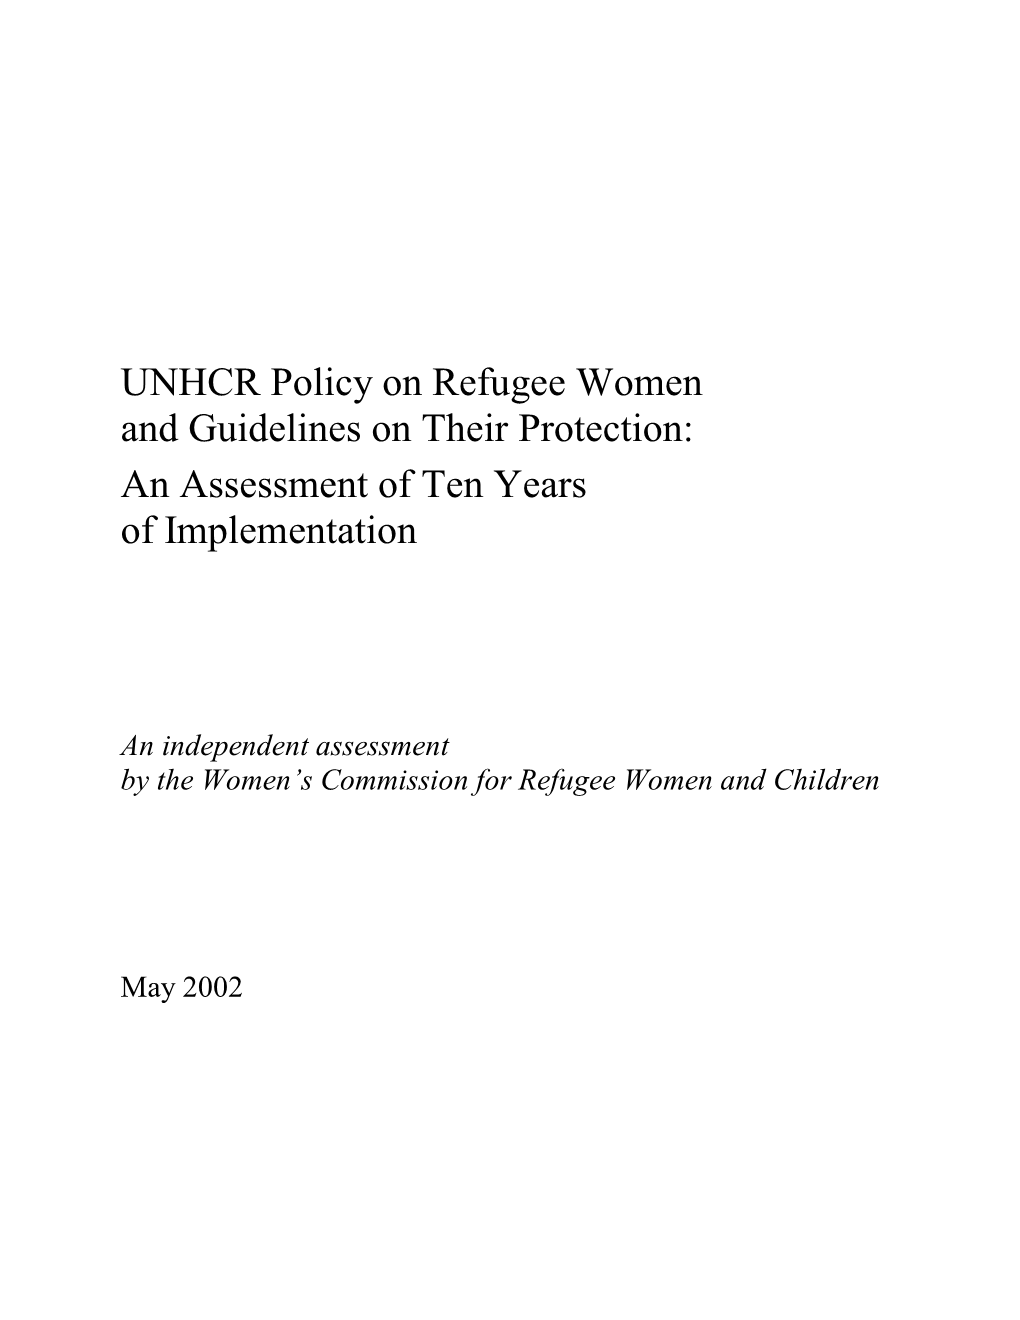 UNHCR Policy on Refugee Women and Guidelines on Their Protection: an Assessment of Ten Years of Implementation